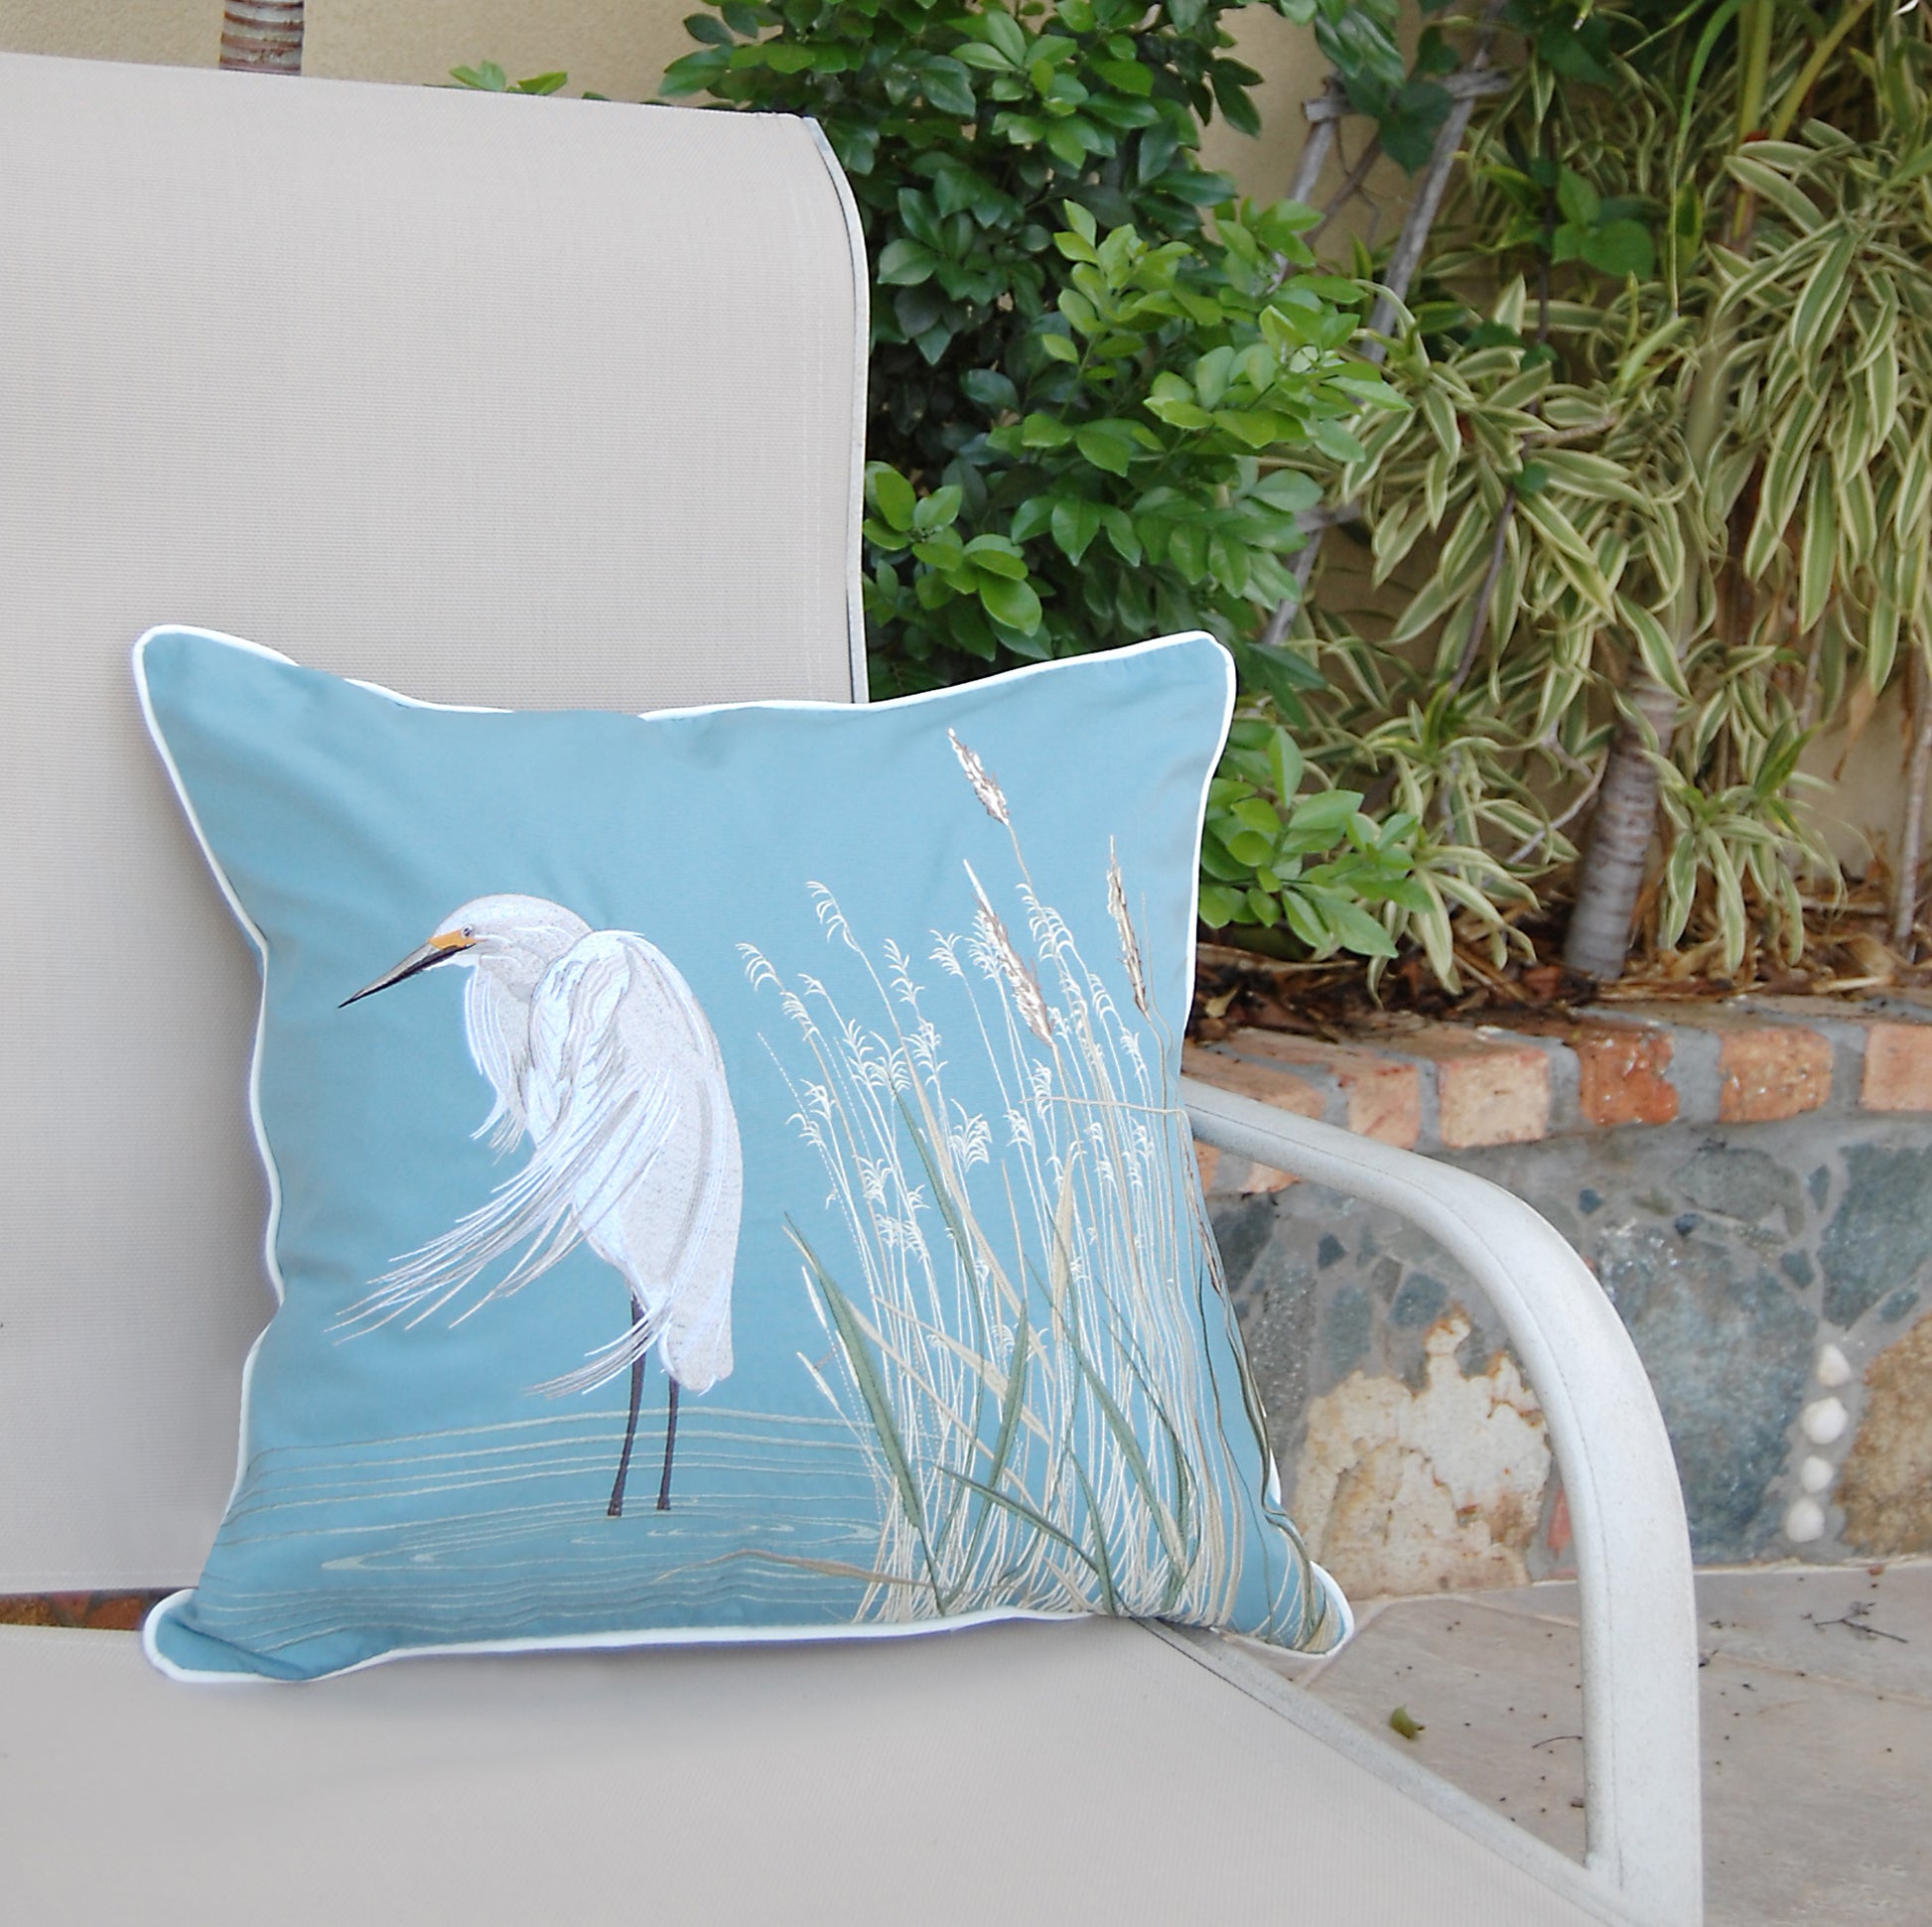 Snowy White Egret Indoor Outdoor Pillow styled on a patio chair.